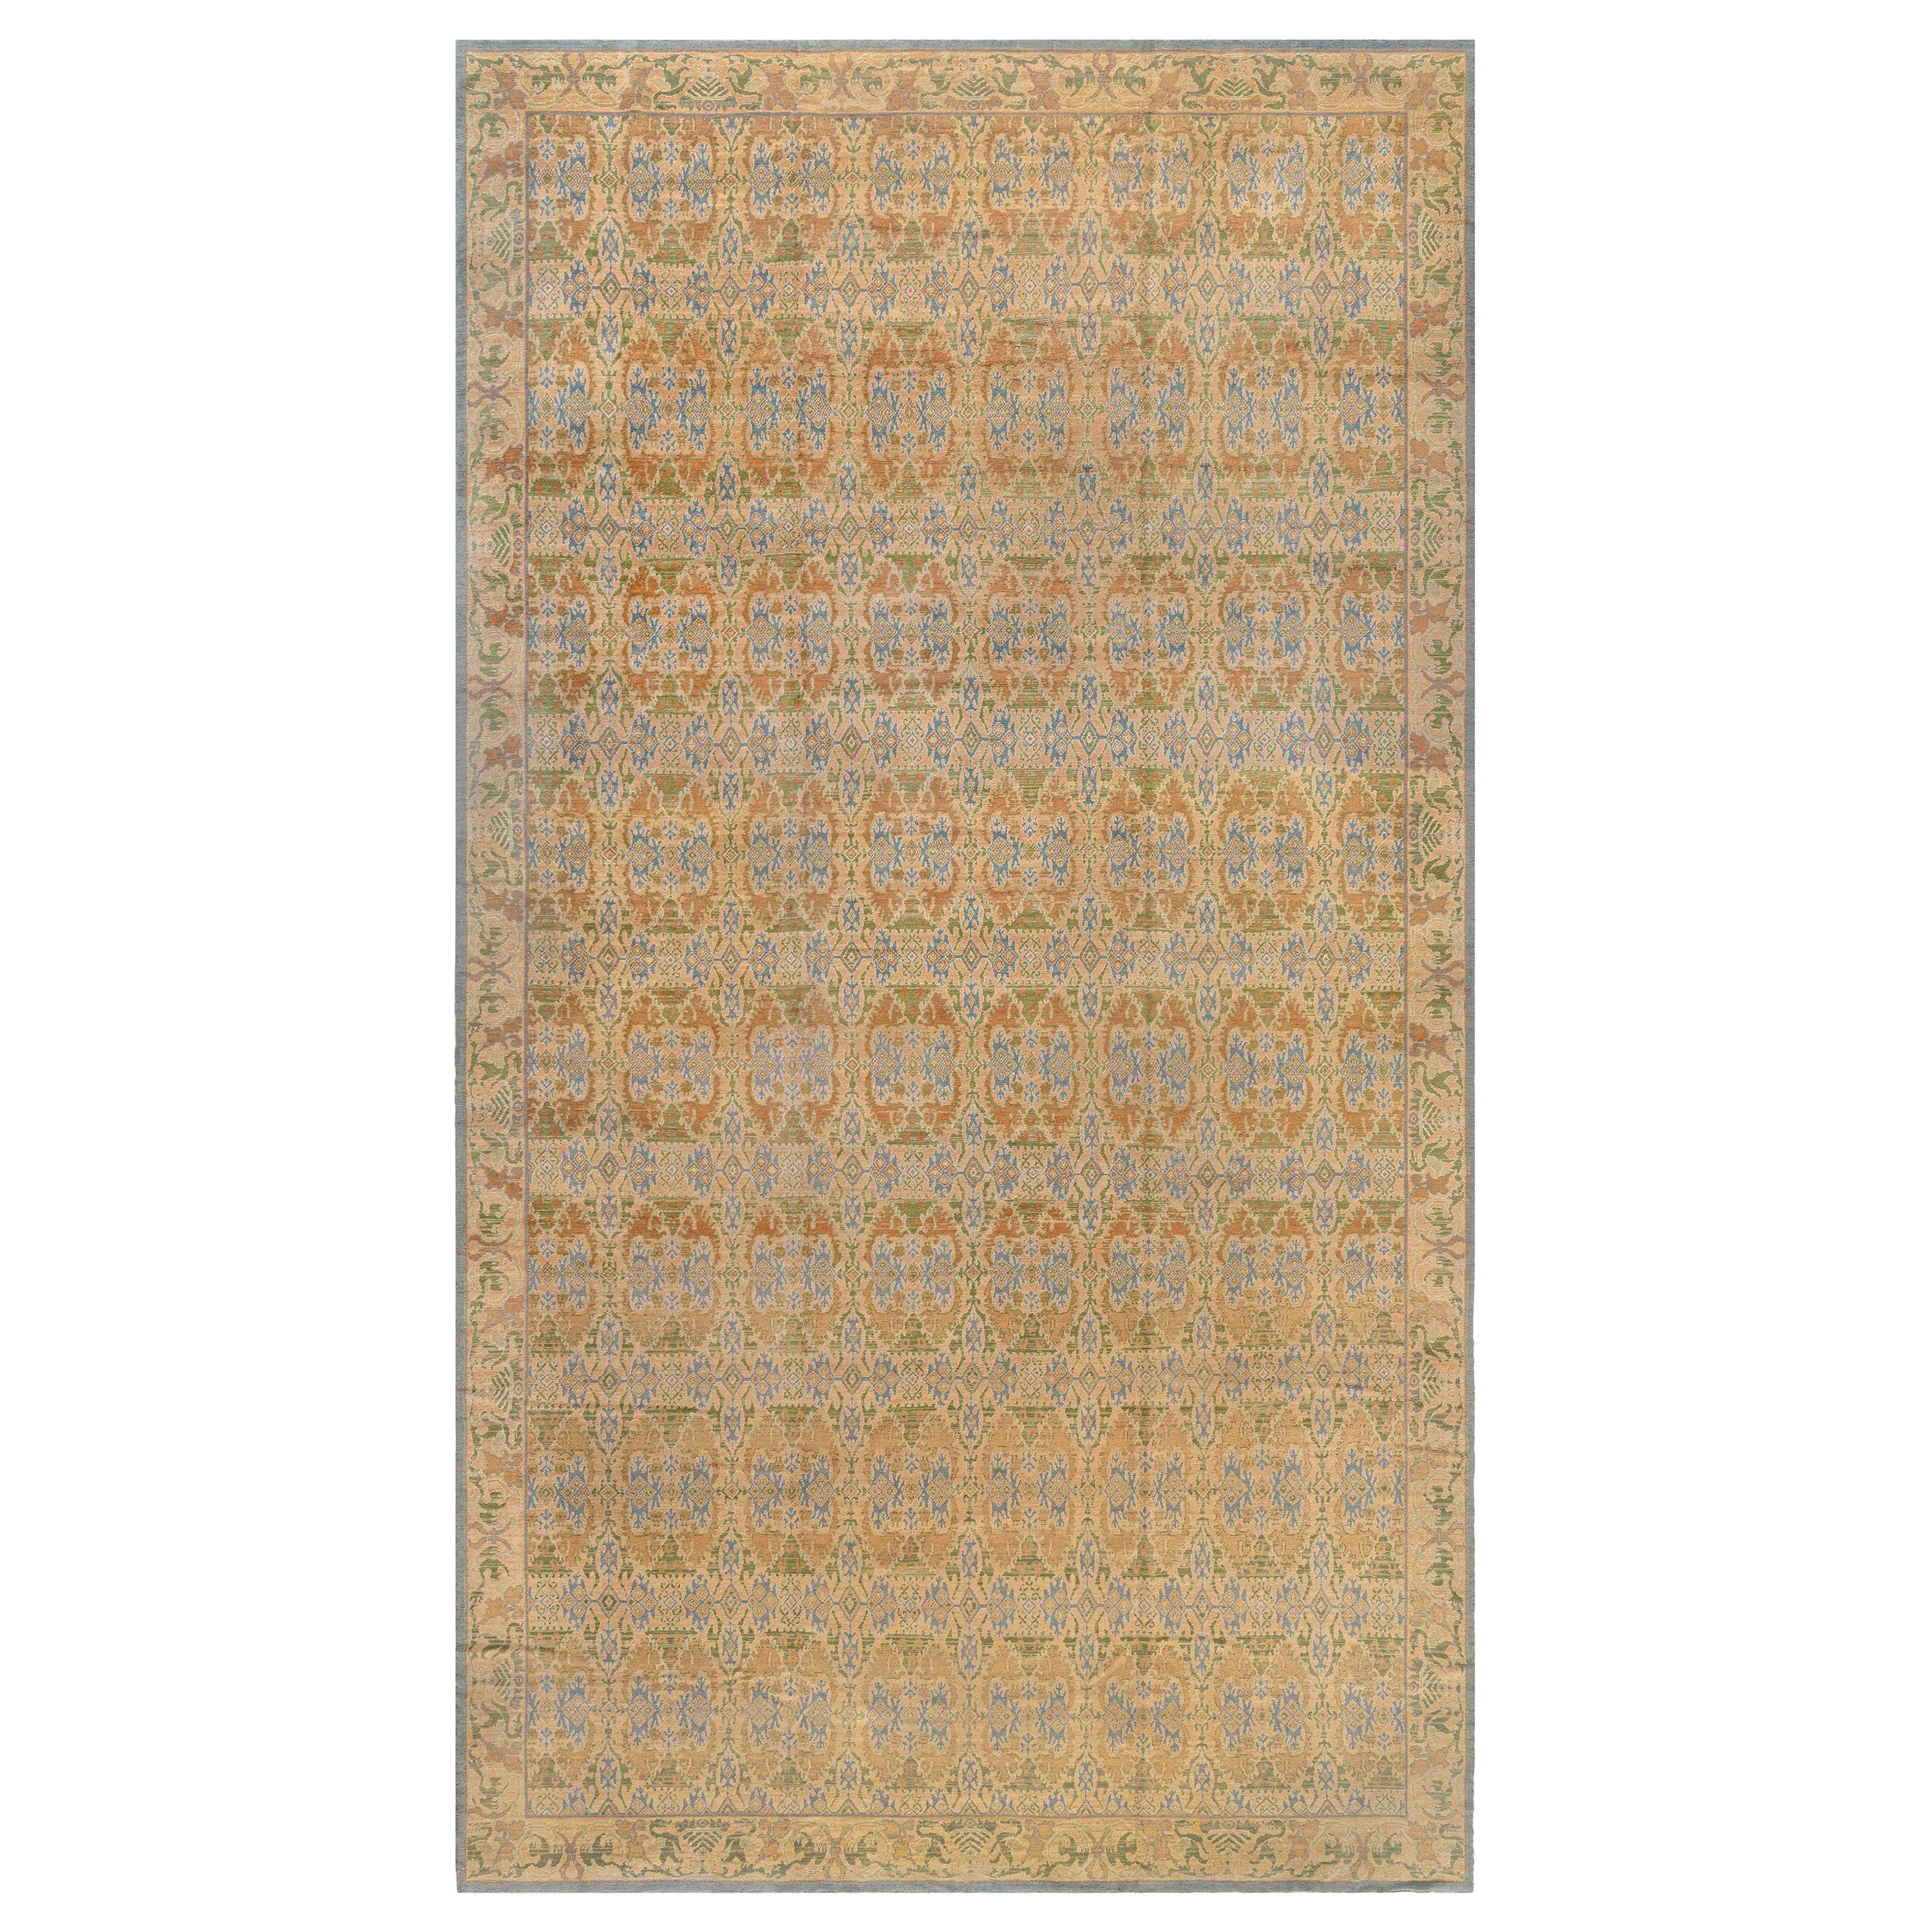 Vintage Spanish Rug in Yellow, Blue and Green